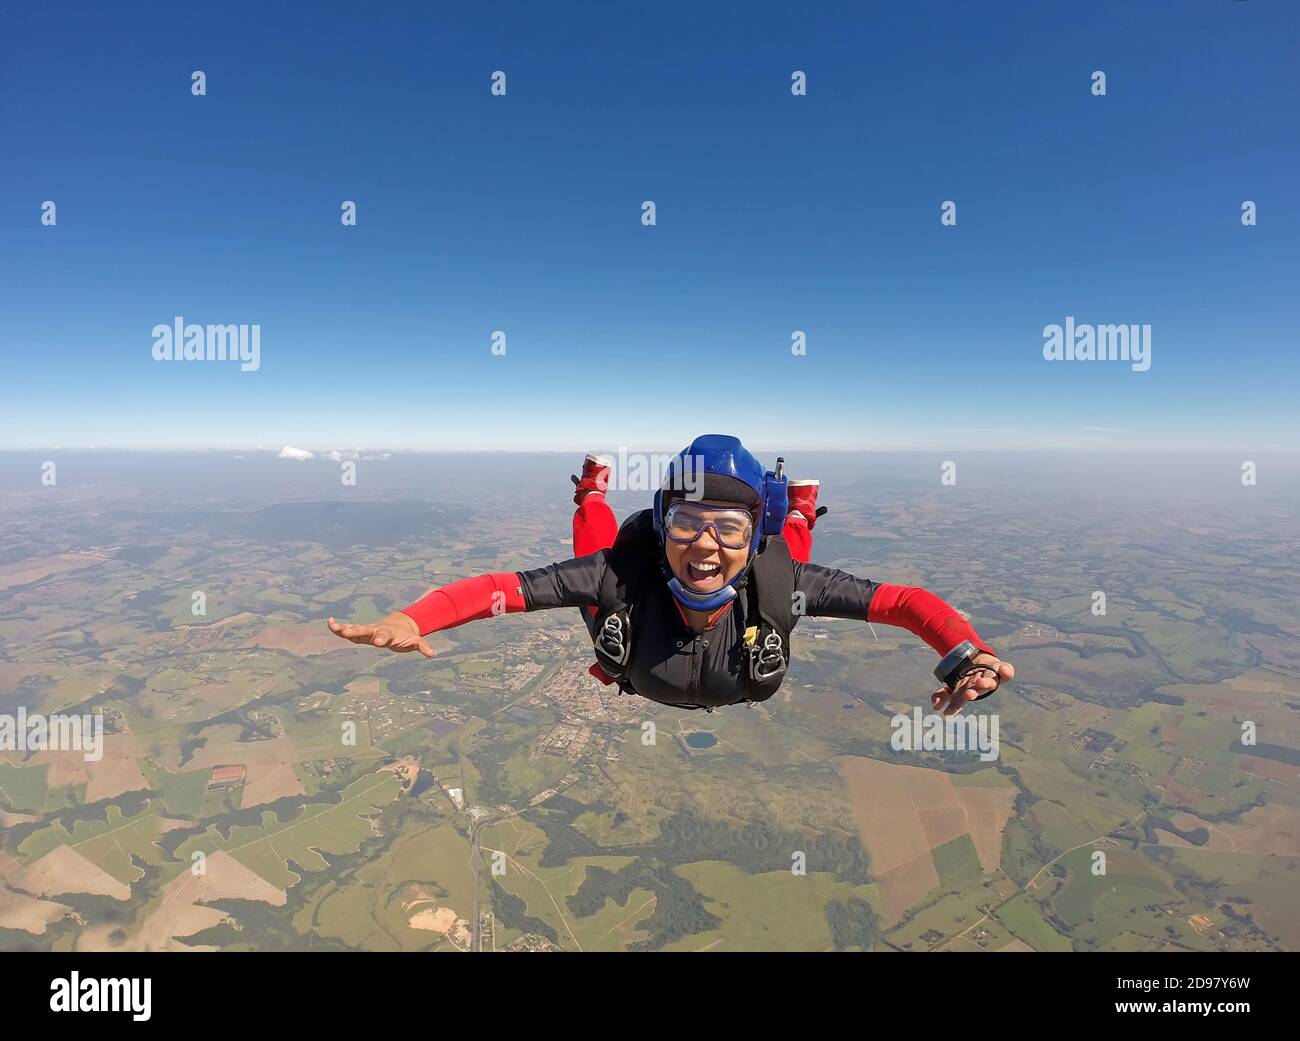 Smiling black woman jumping from parachute Stock Photo